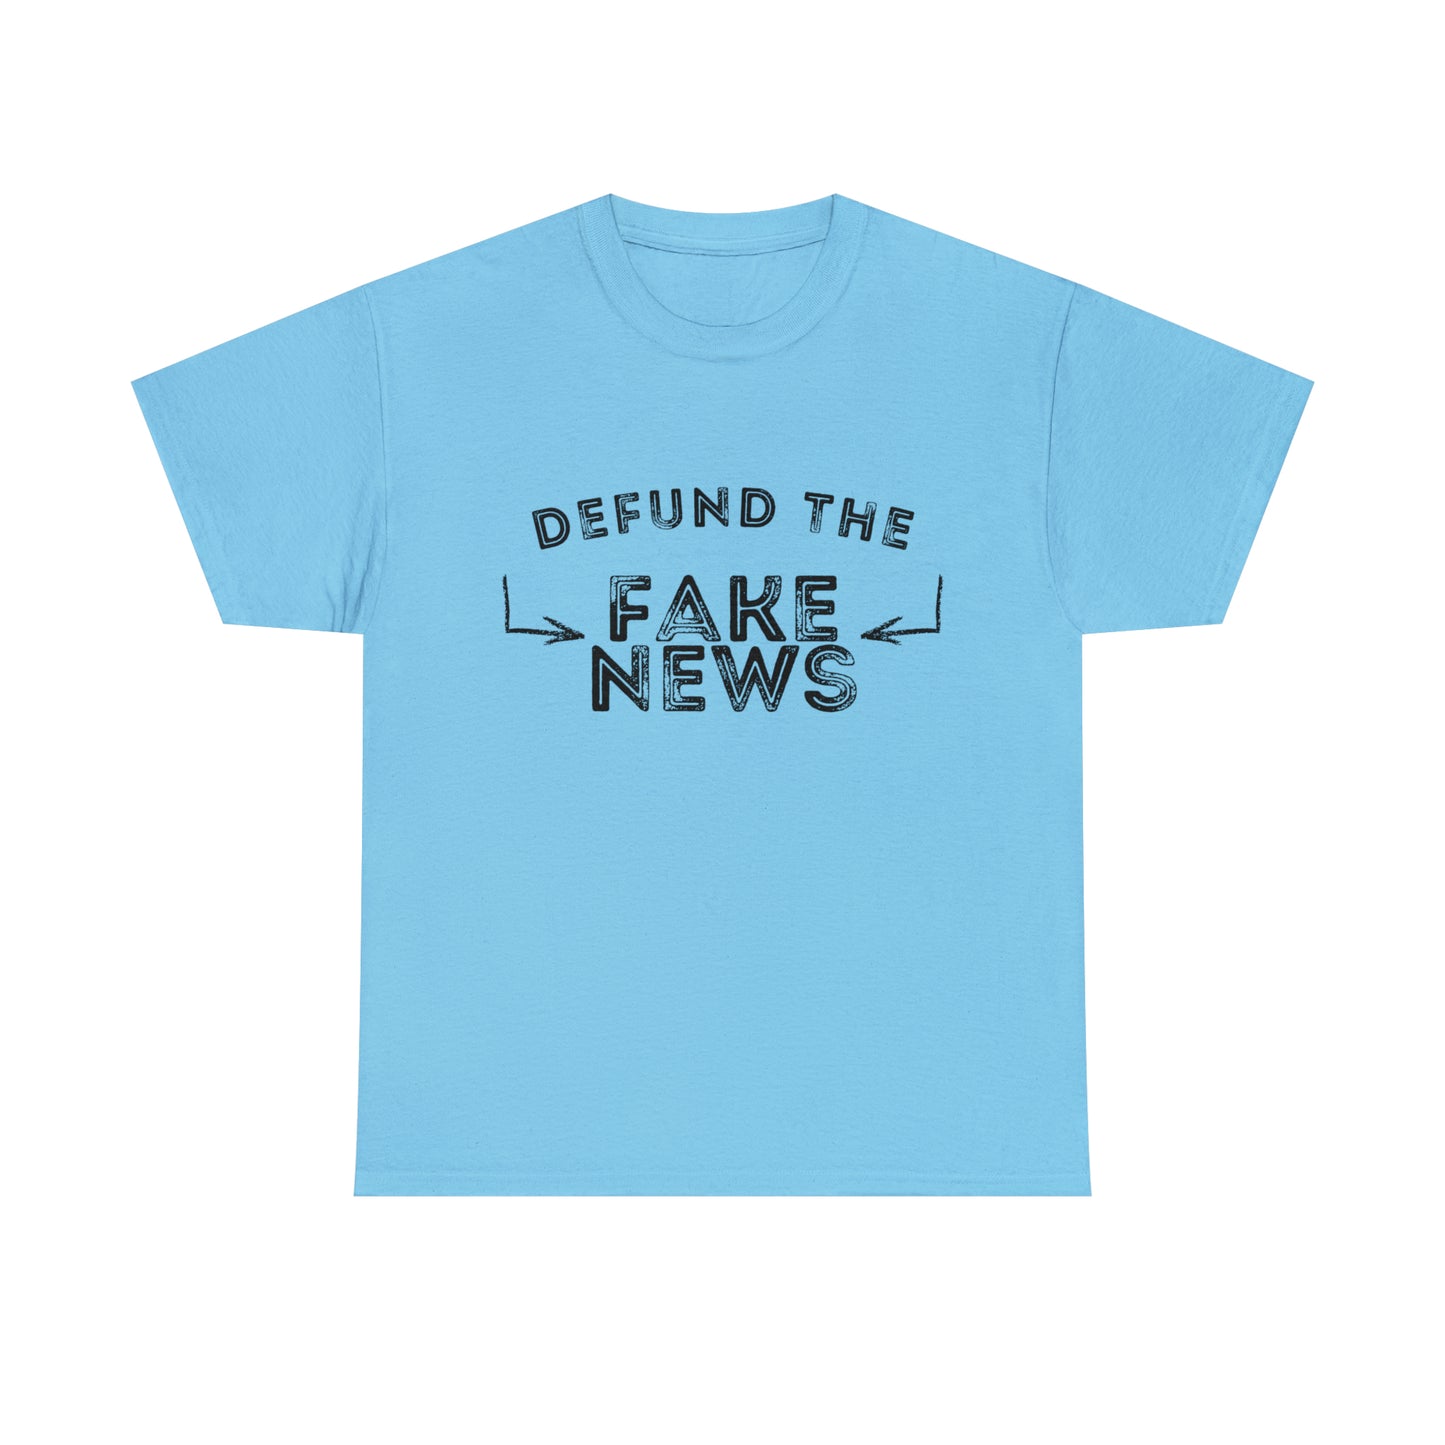 "Defund The Fake News" T-Shirt - Weave Got Gifts - Unique Gifts You Won’t Find Anywhere Else!